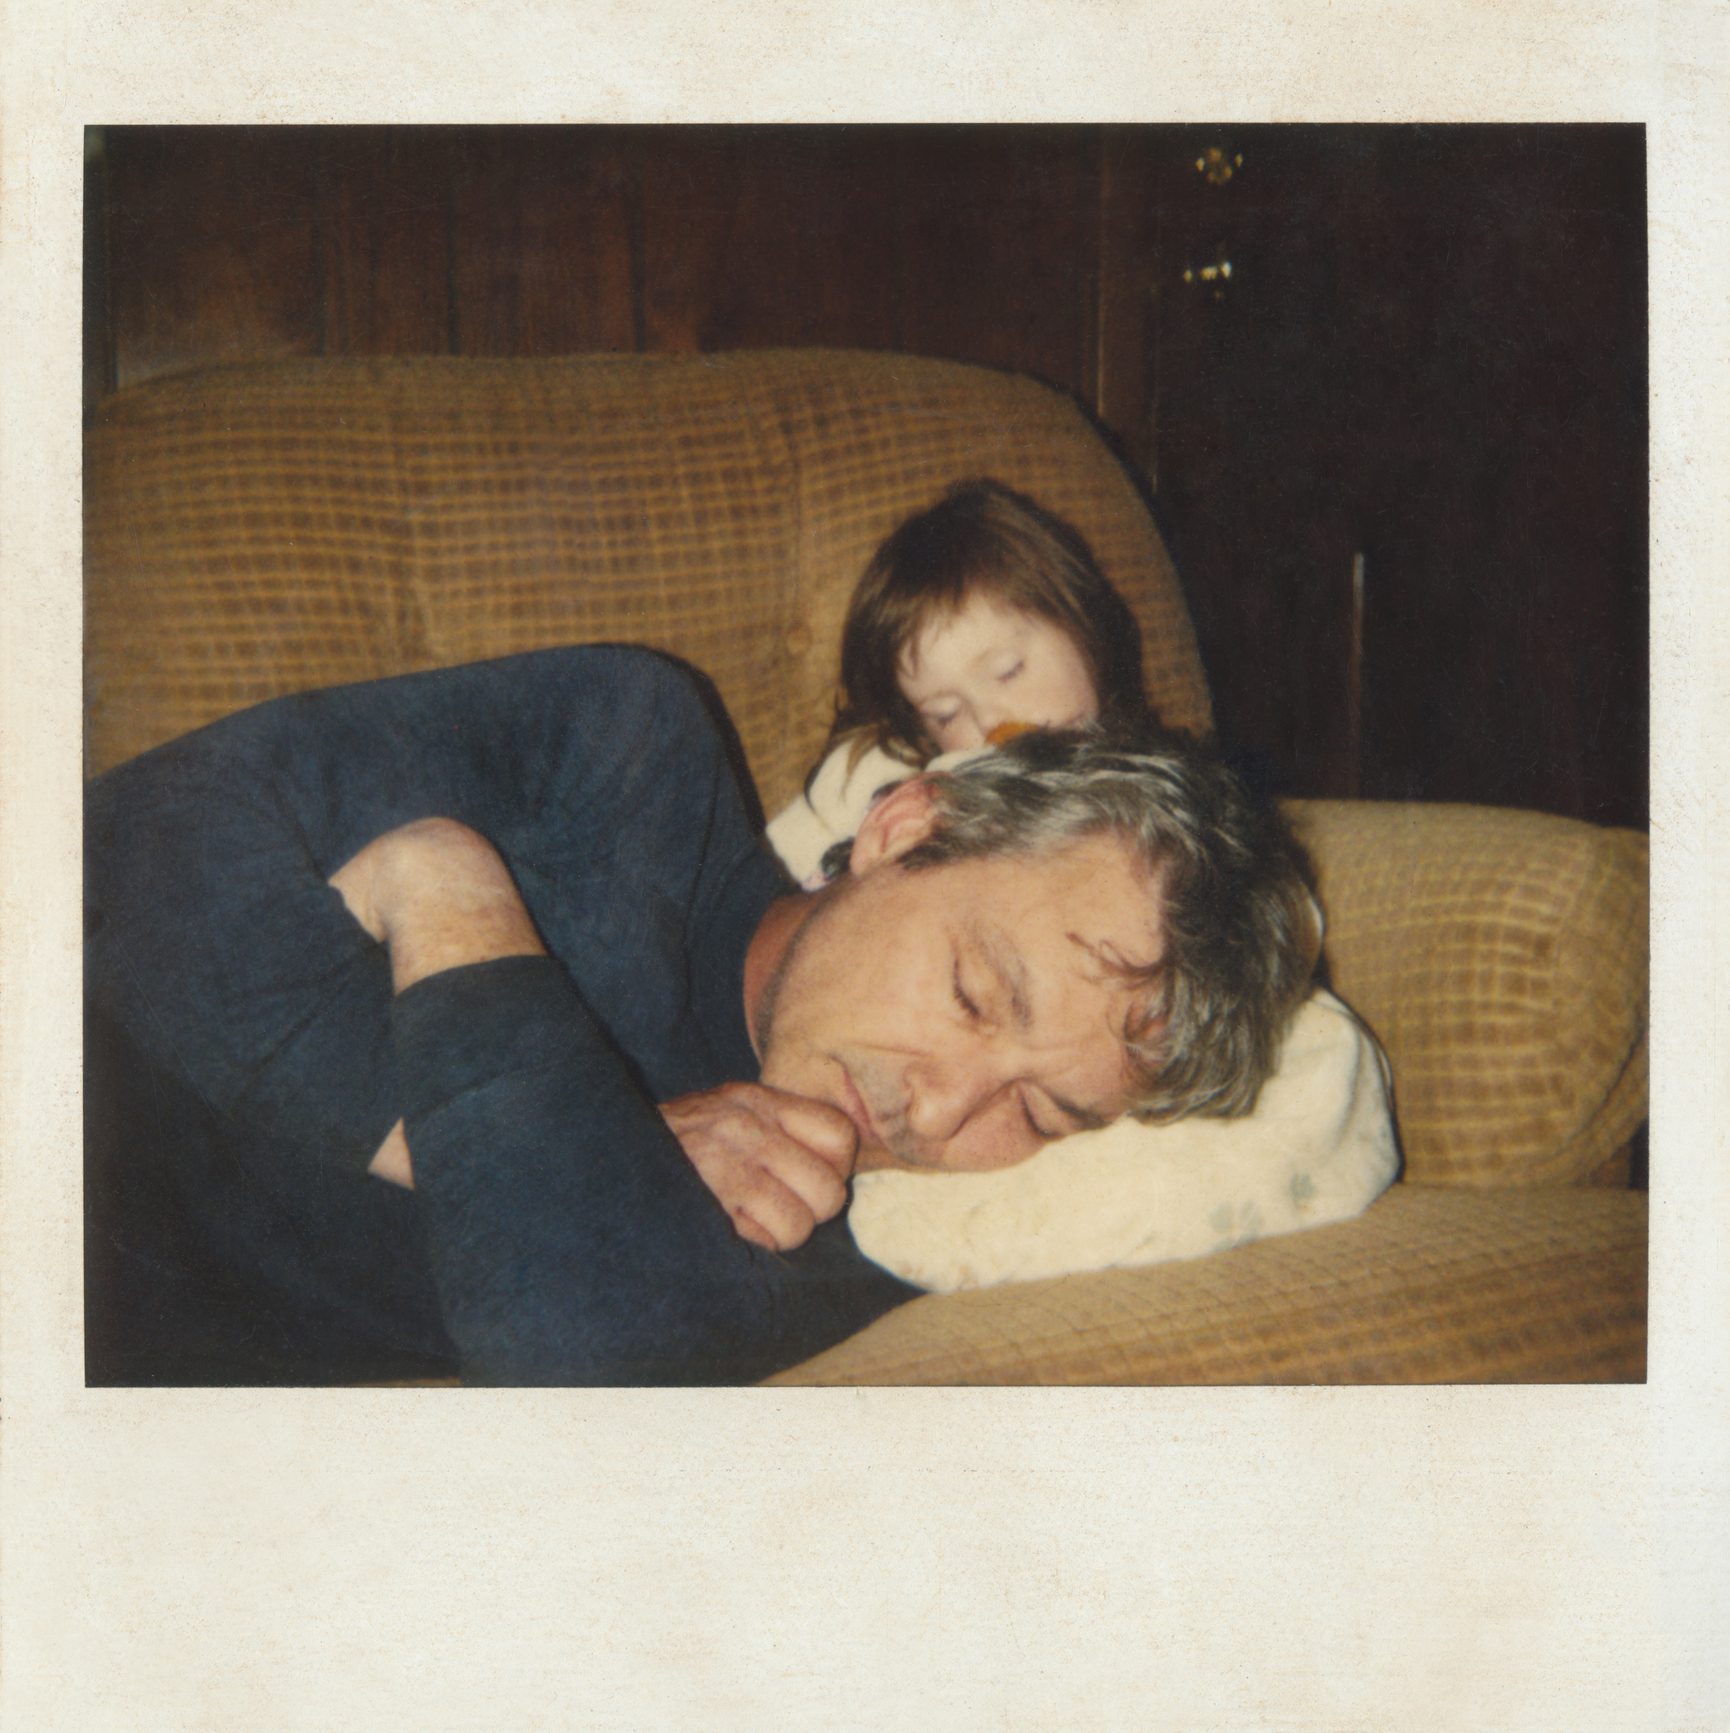 dad and his young daughter asleep on the couch